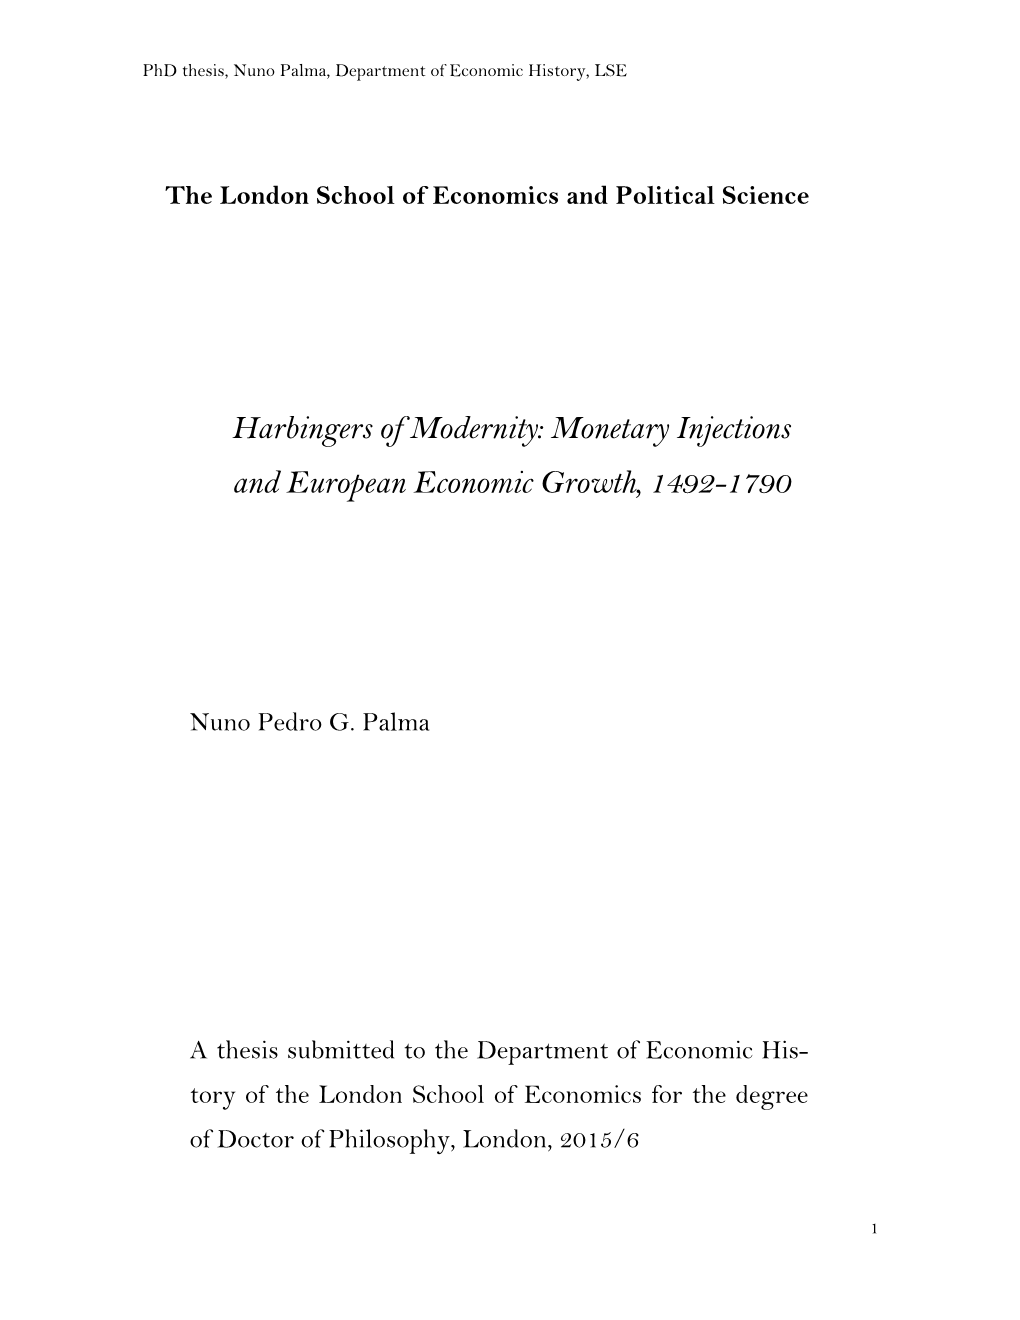 Harbingers of Modernity: Monetary Injections and European Economic Growth, 1492-1790